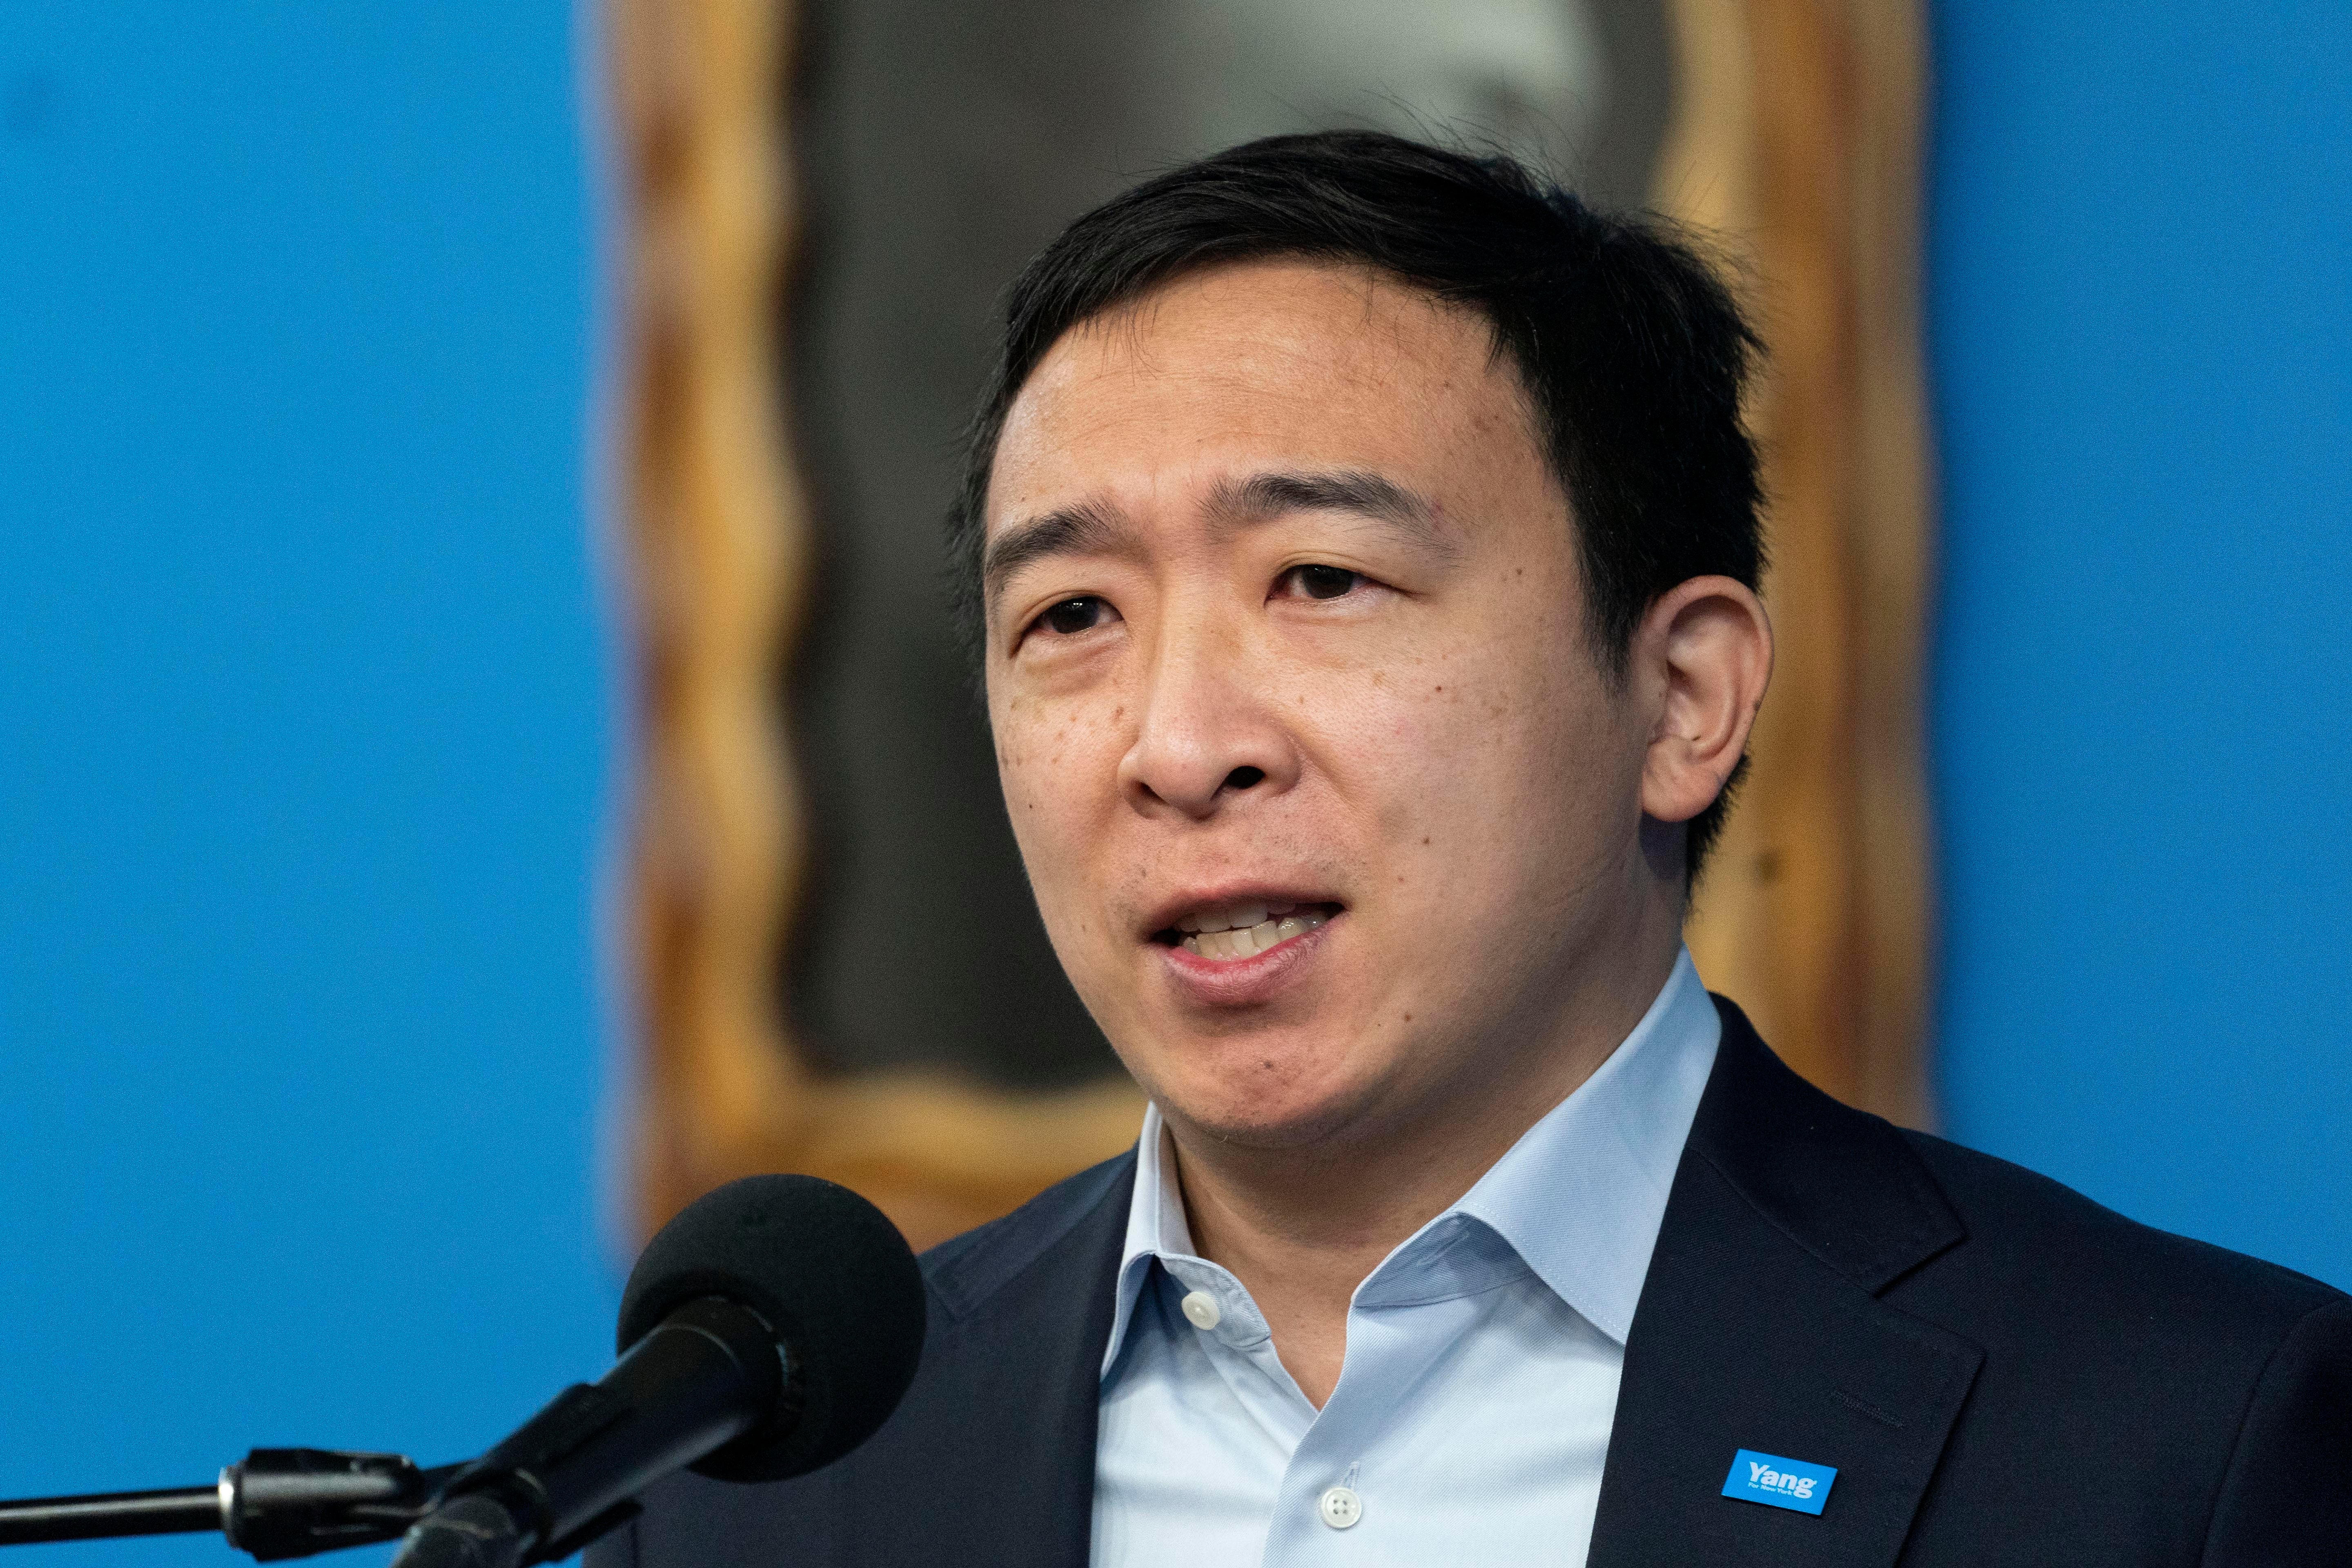 Andrew Yang campaigns for New York City’s Democratic mayoral primary.